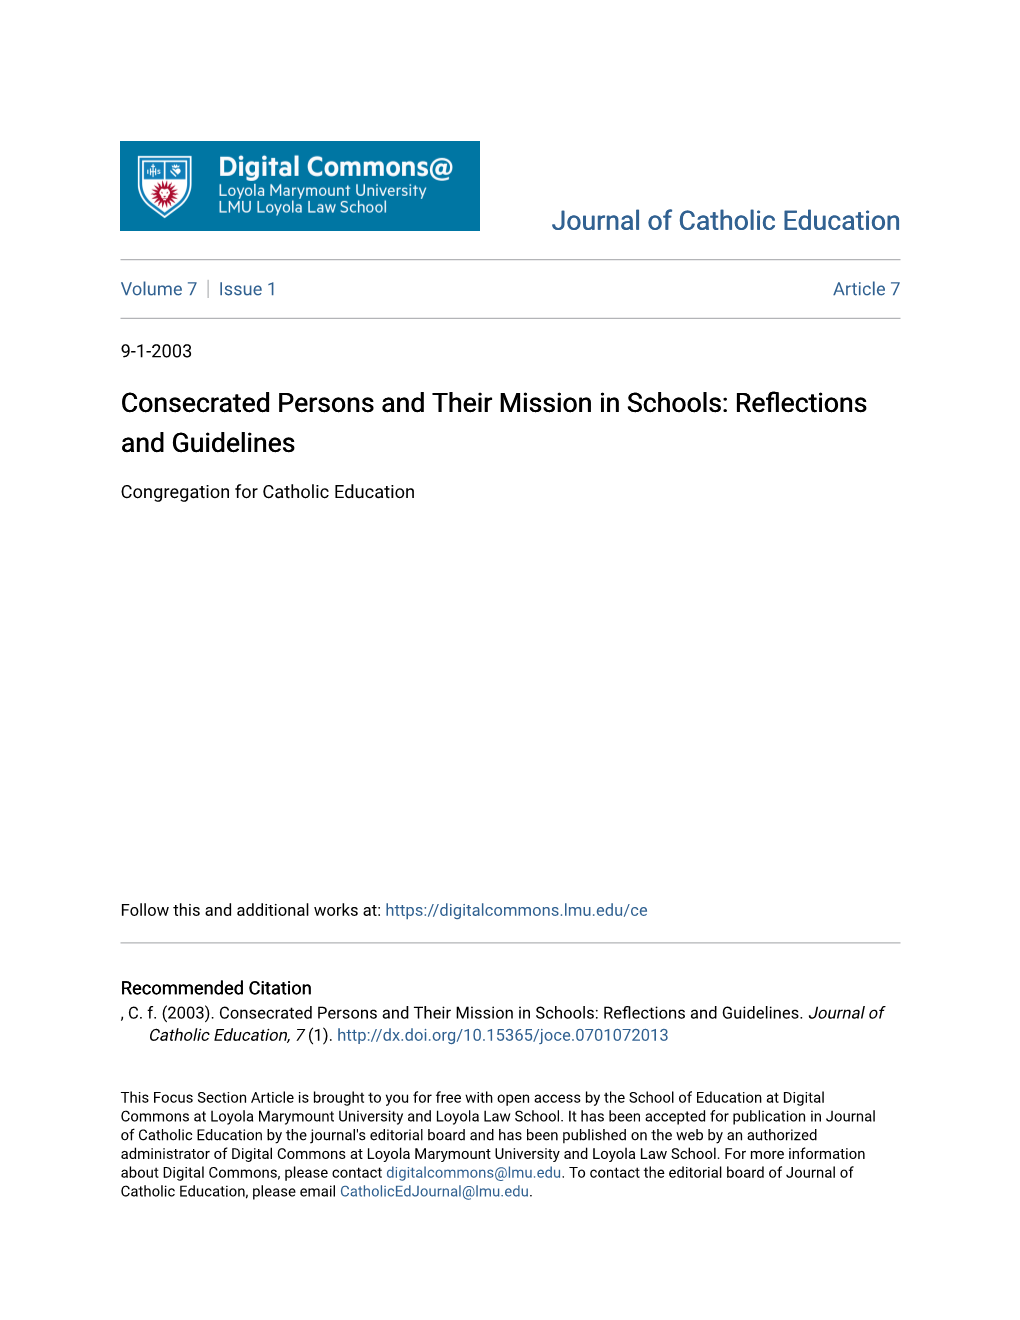 Consecrated Persons and Their Mission in Schools: Reflections and Guidelines